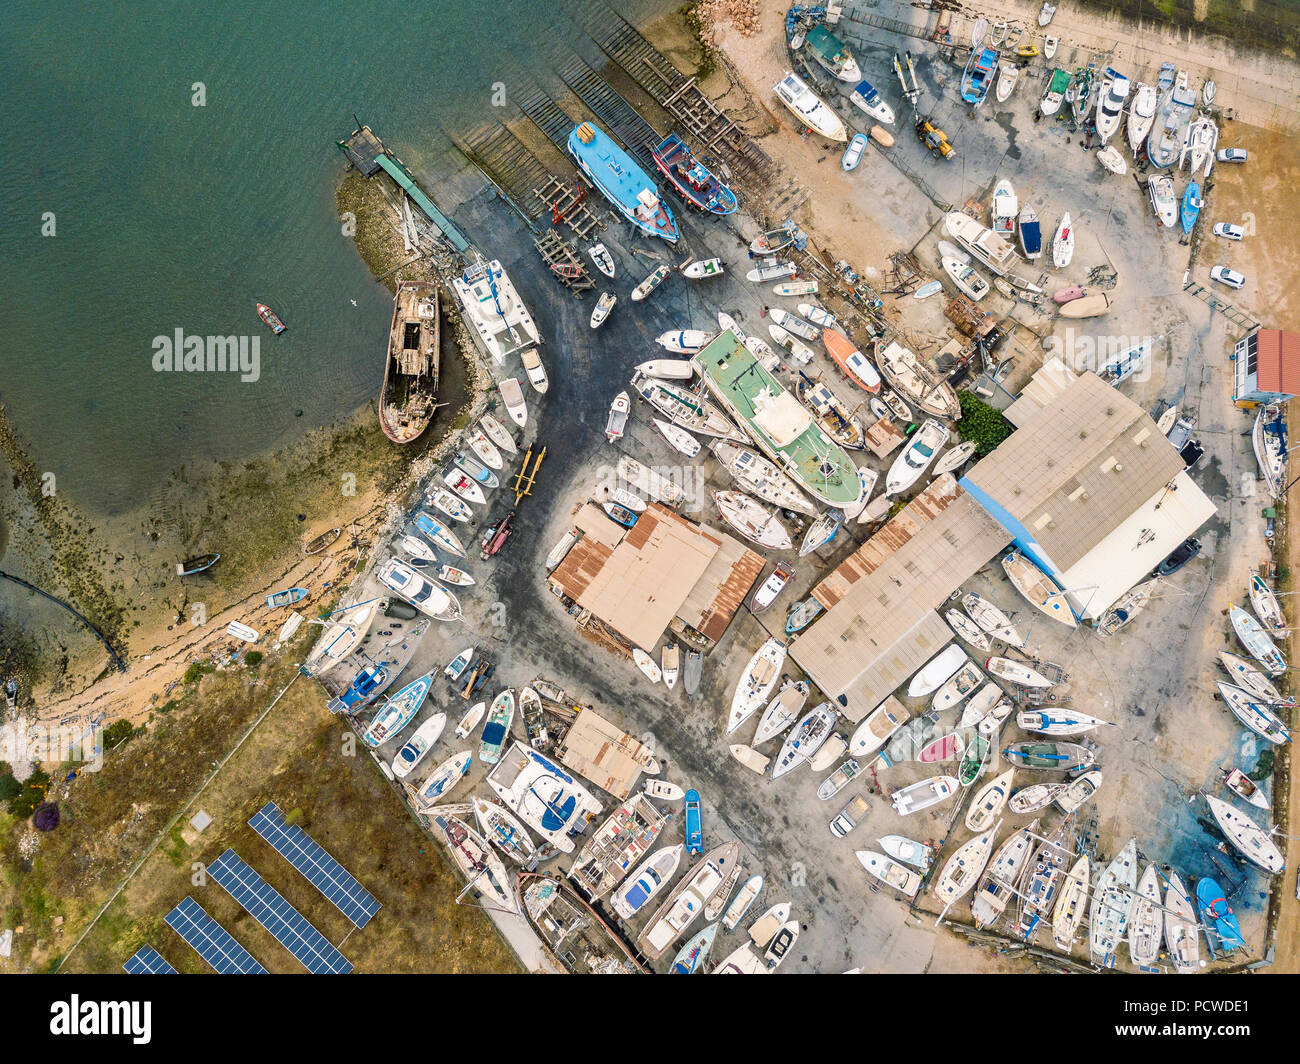 Aerial view of dry docks and shipyard with many boats in Olhao, Portugal Stock Photo